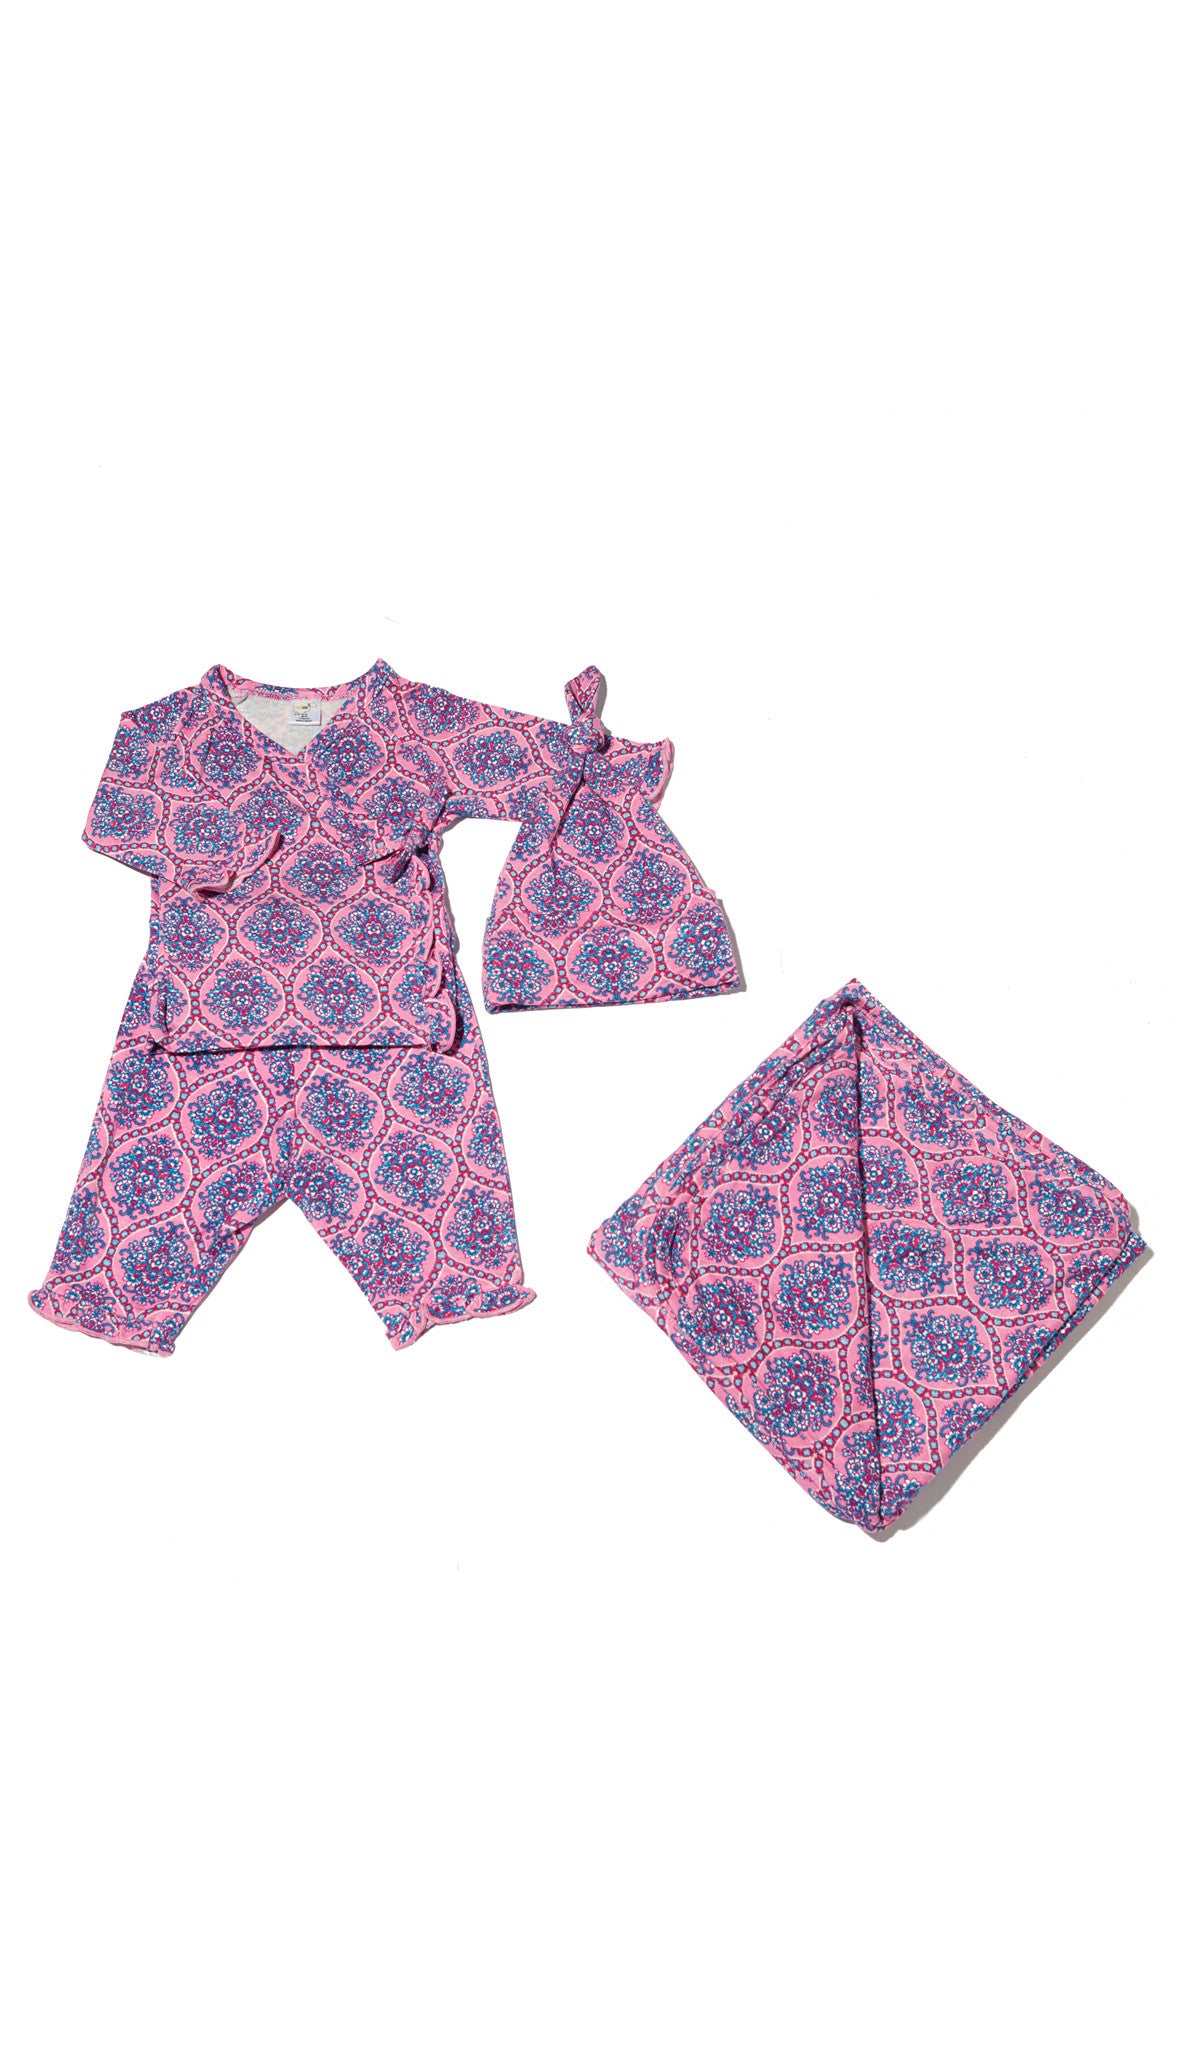 India Floral Baby's Ruffle Take-Me-Home 3 Piece set flat shot showing long sleeve kimono top and pant with ruffle trim, and matching knotted baby hat..  Matching blanket folded into a square is sold separately.